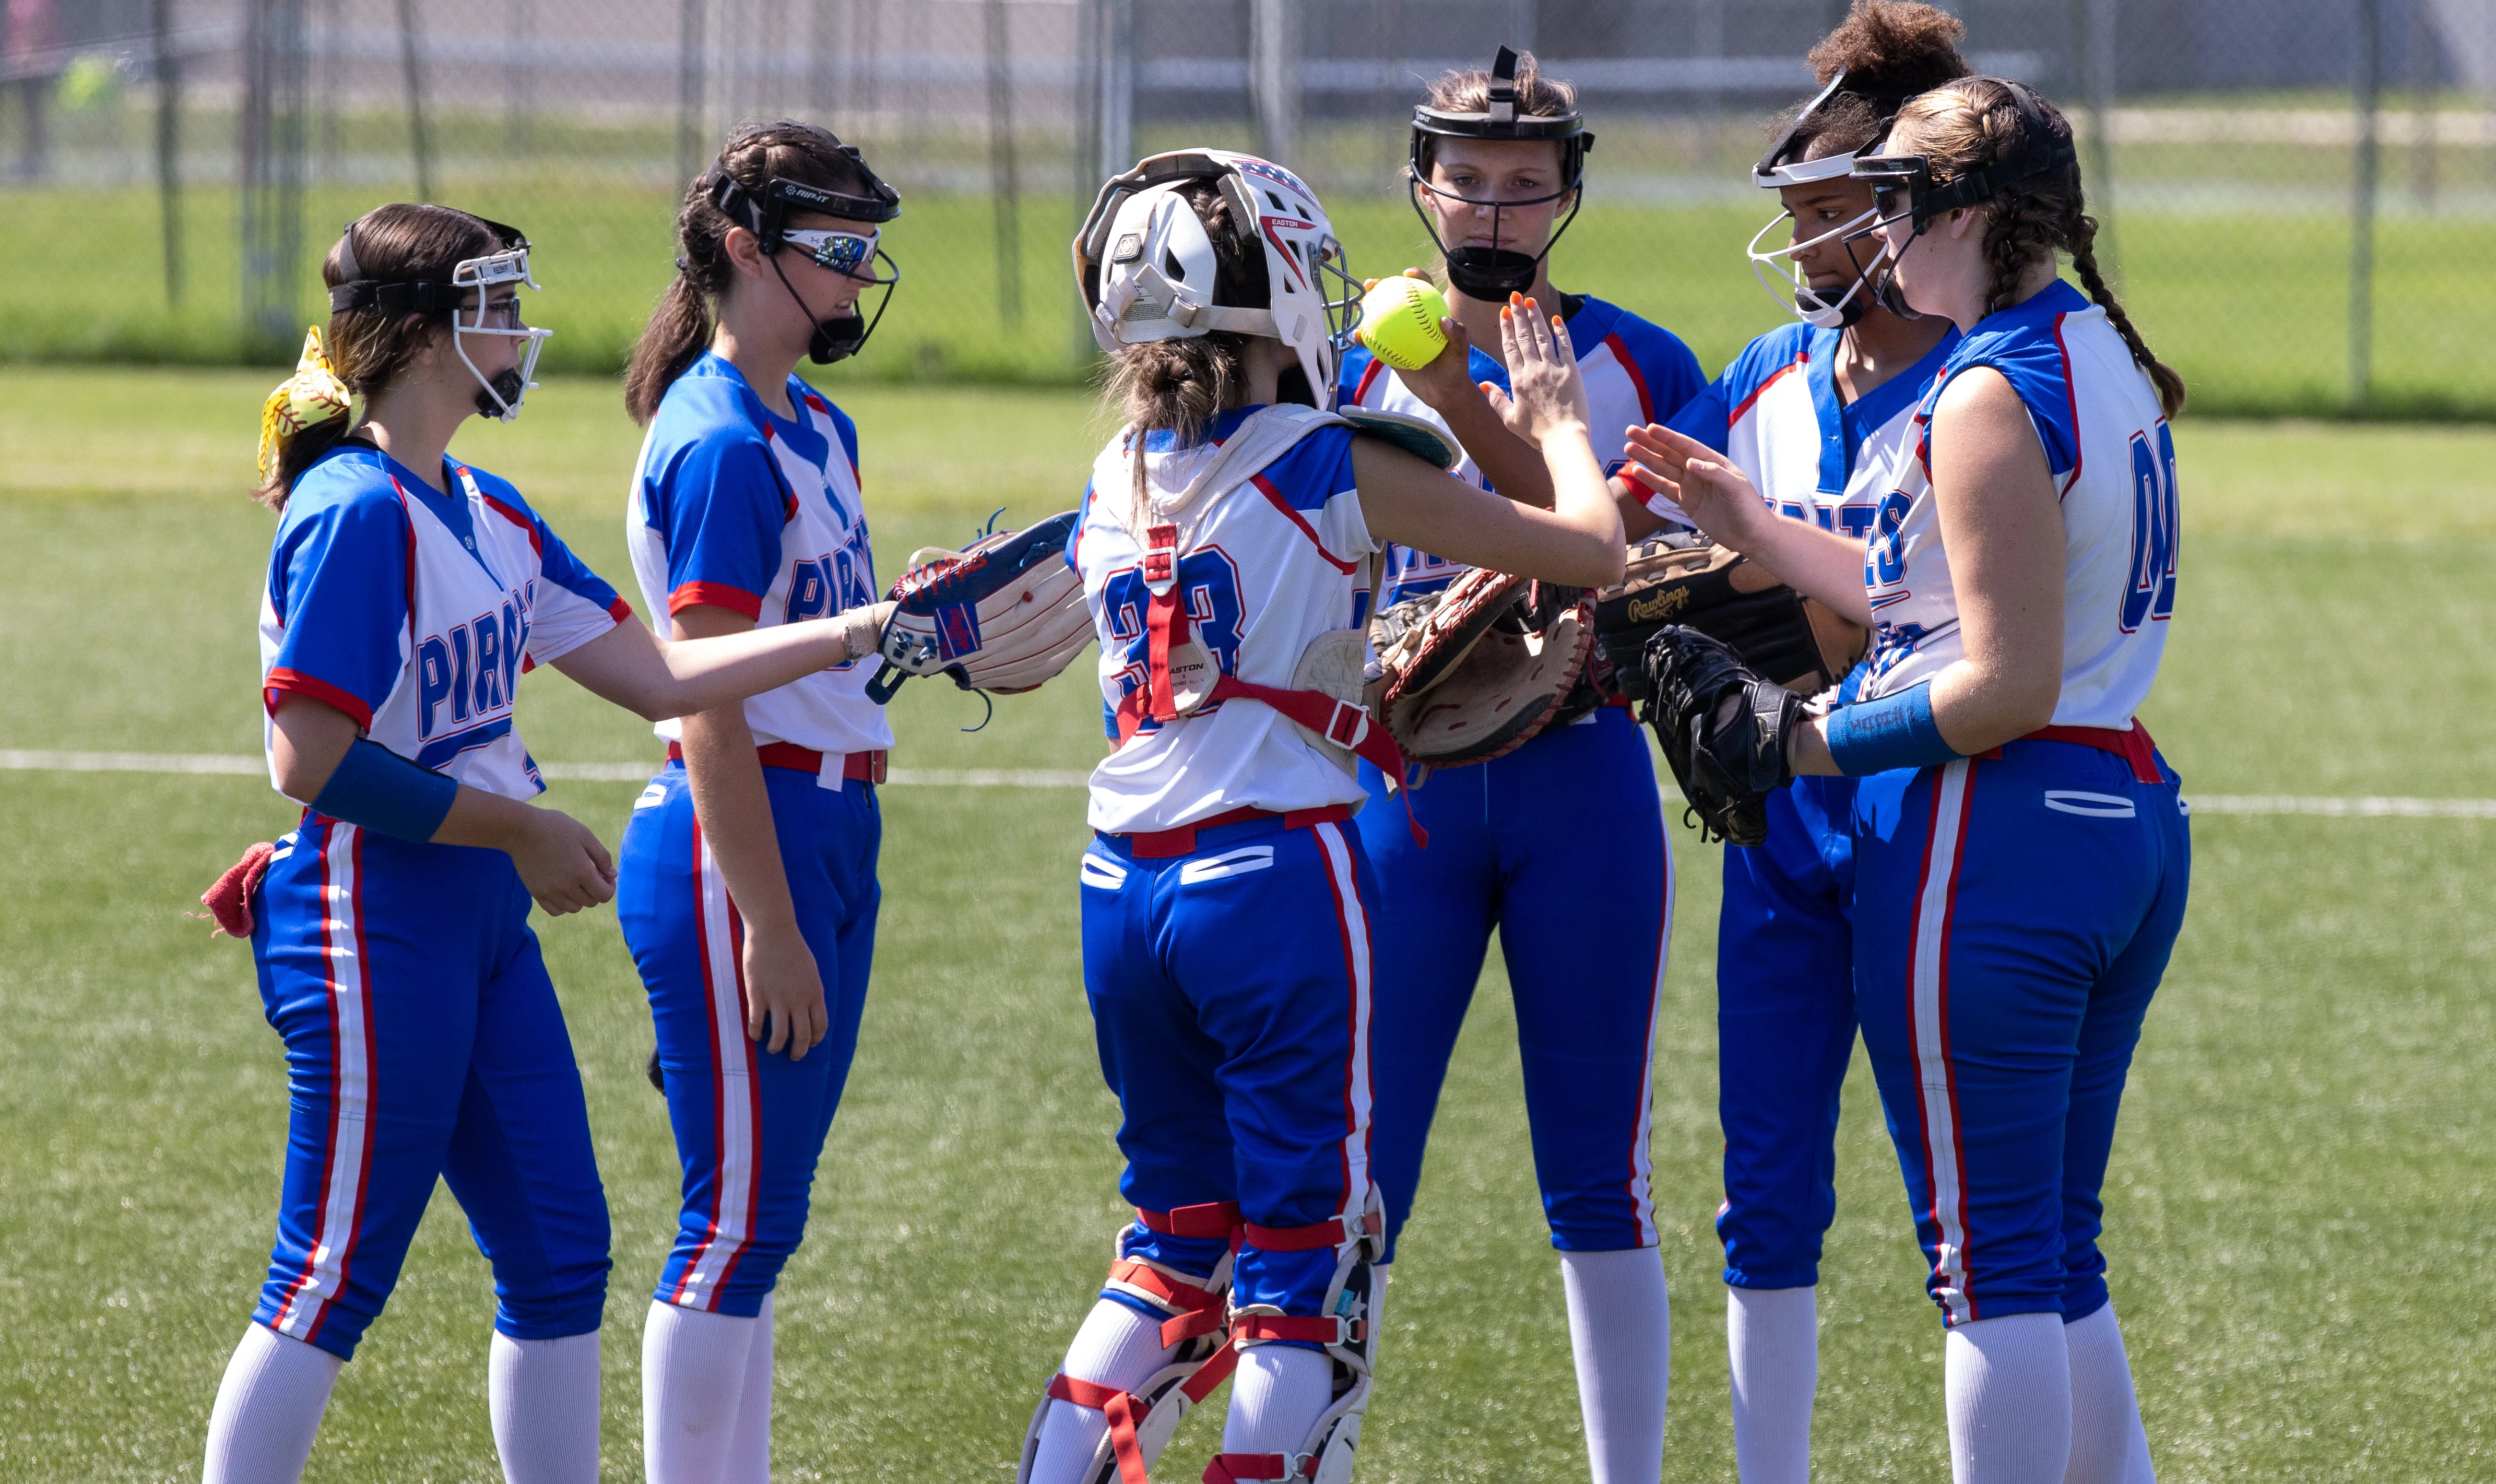 Fastpitch Softball Uniforms - Something for Every Team